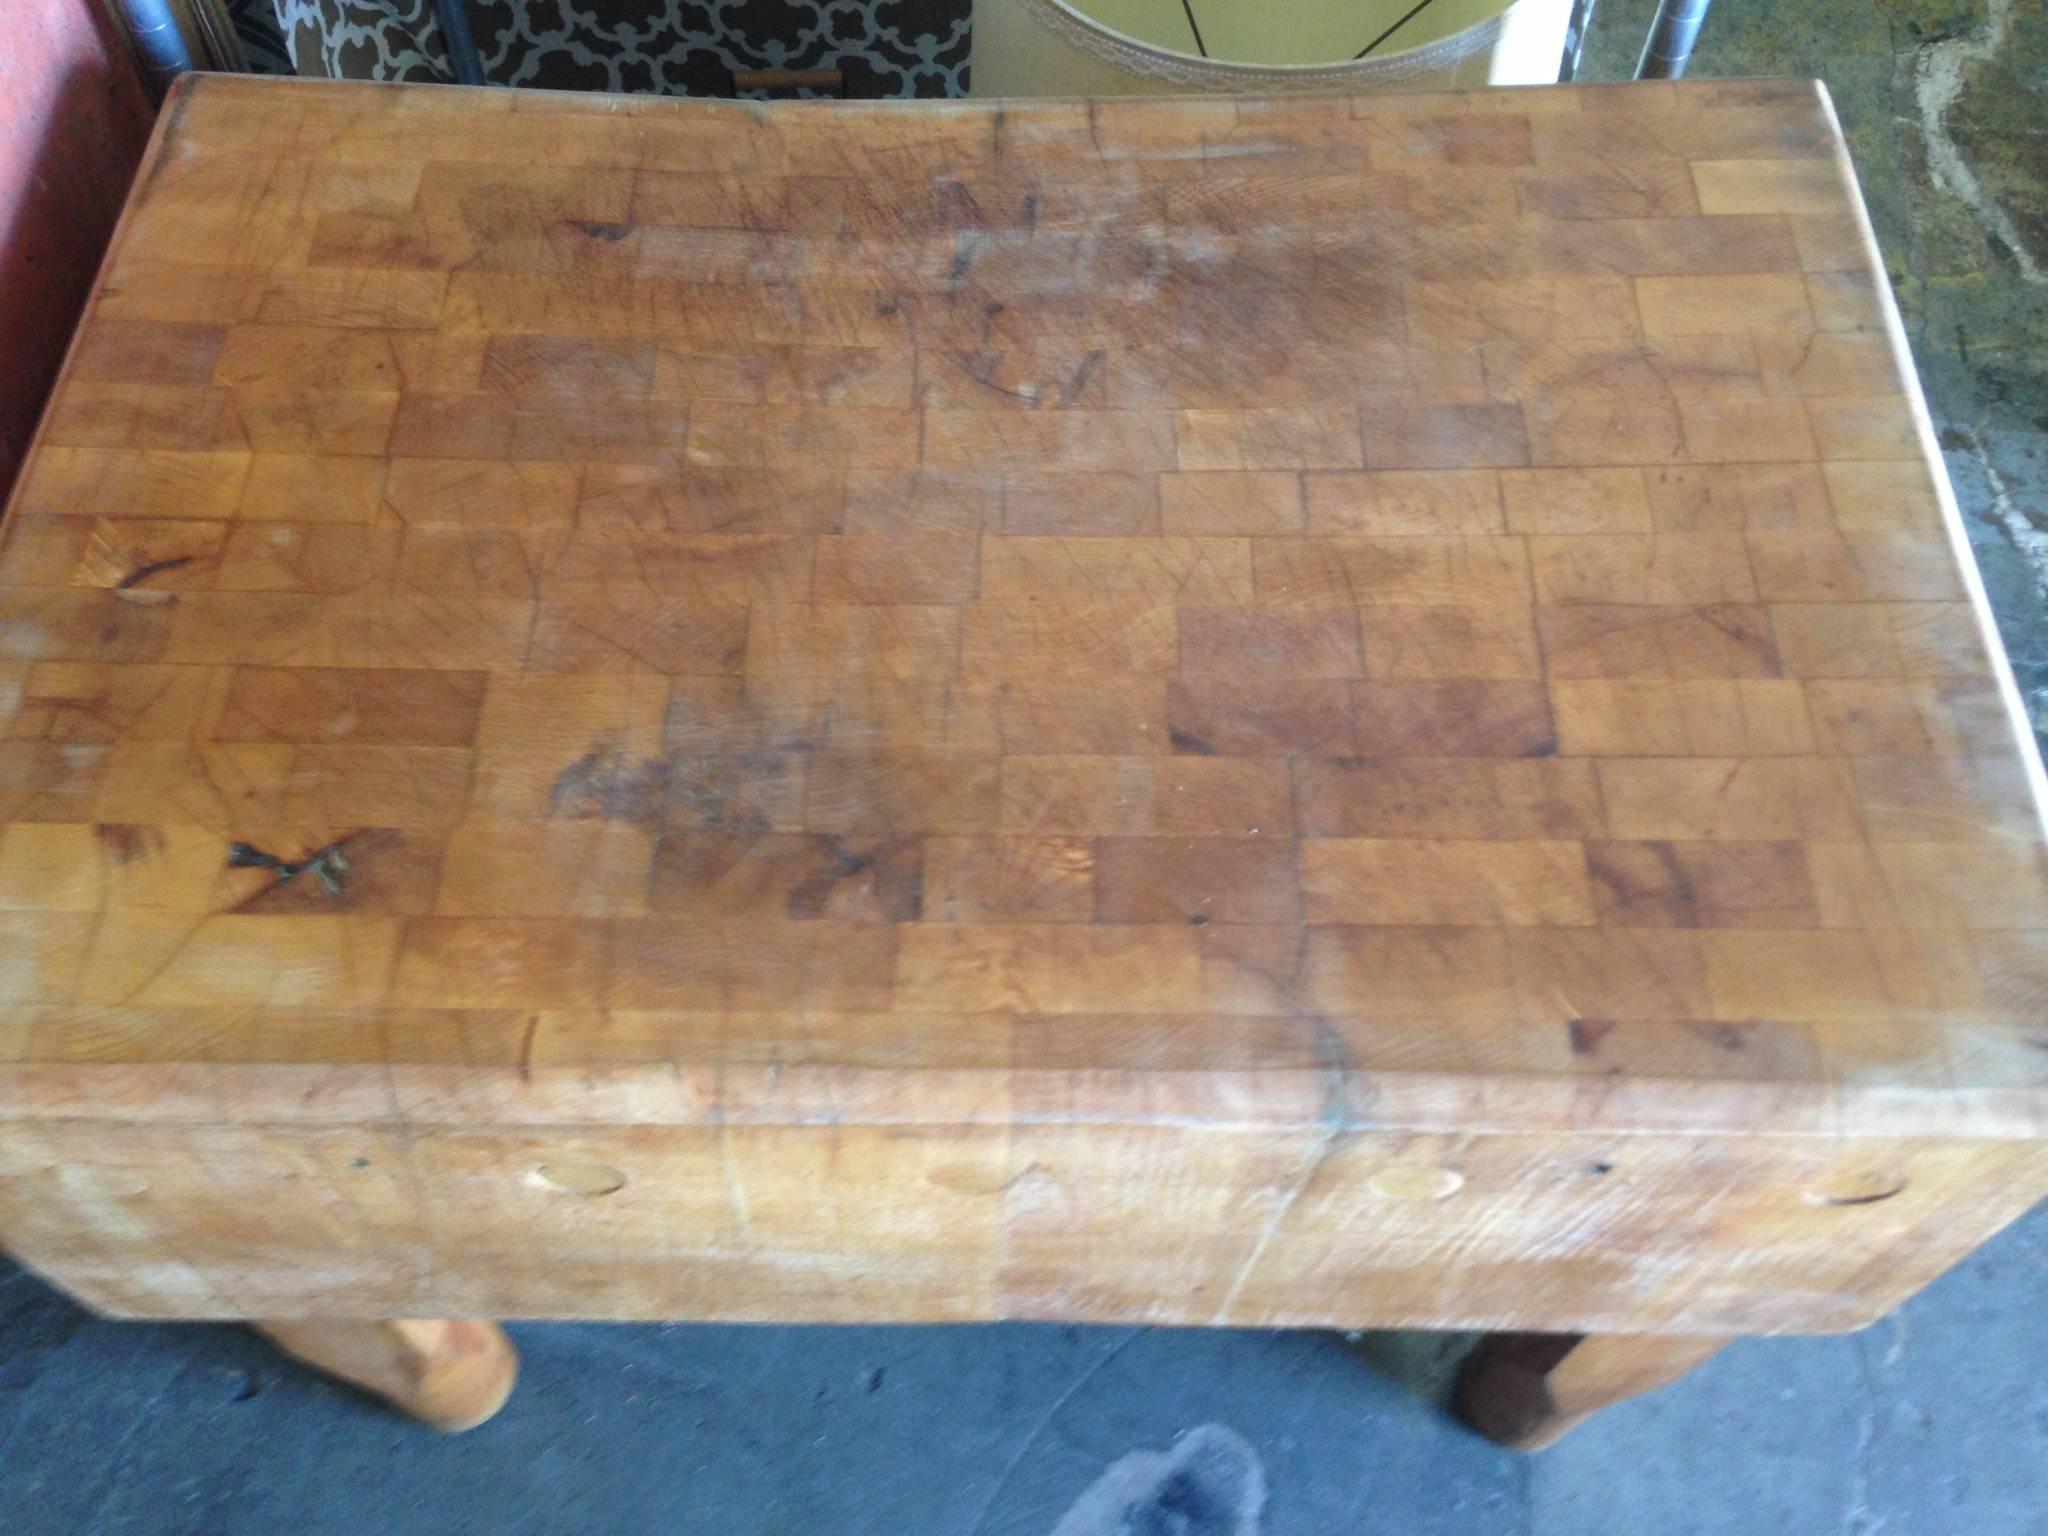 Butcher block from New York meat market dates back to the early 1900s. Rock solid maple with wonderfully patinated top of use and wear and carved out legs. You could dance on the top. It's not going anywhere. Put on wheels and raise it to island